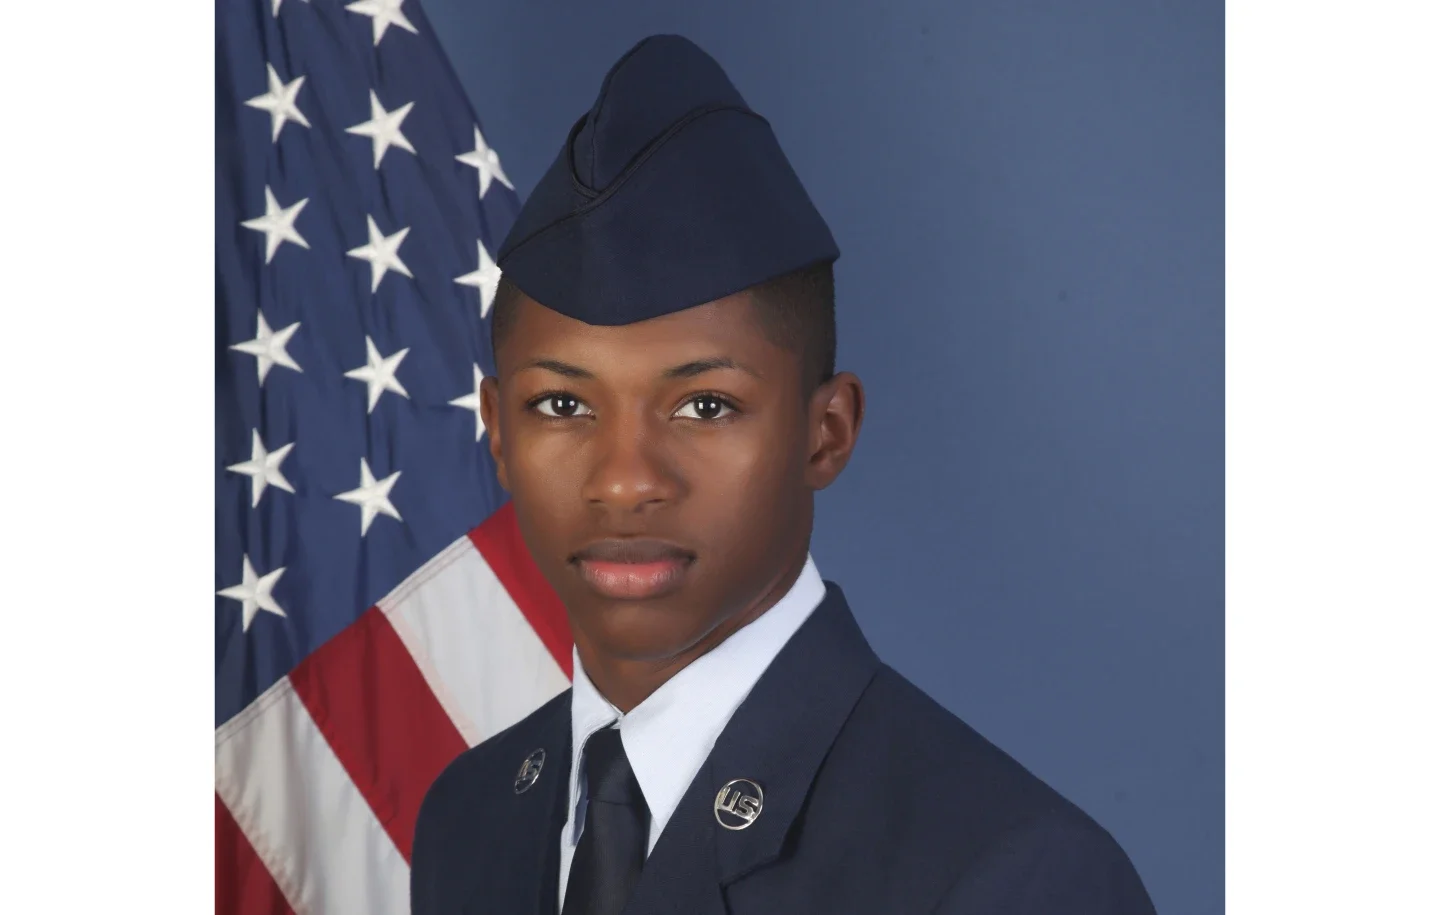 The Fatal Shooting Of Black U.S. Airman By Florida Deputy Renews Debate About Race And Police Killings